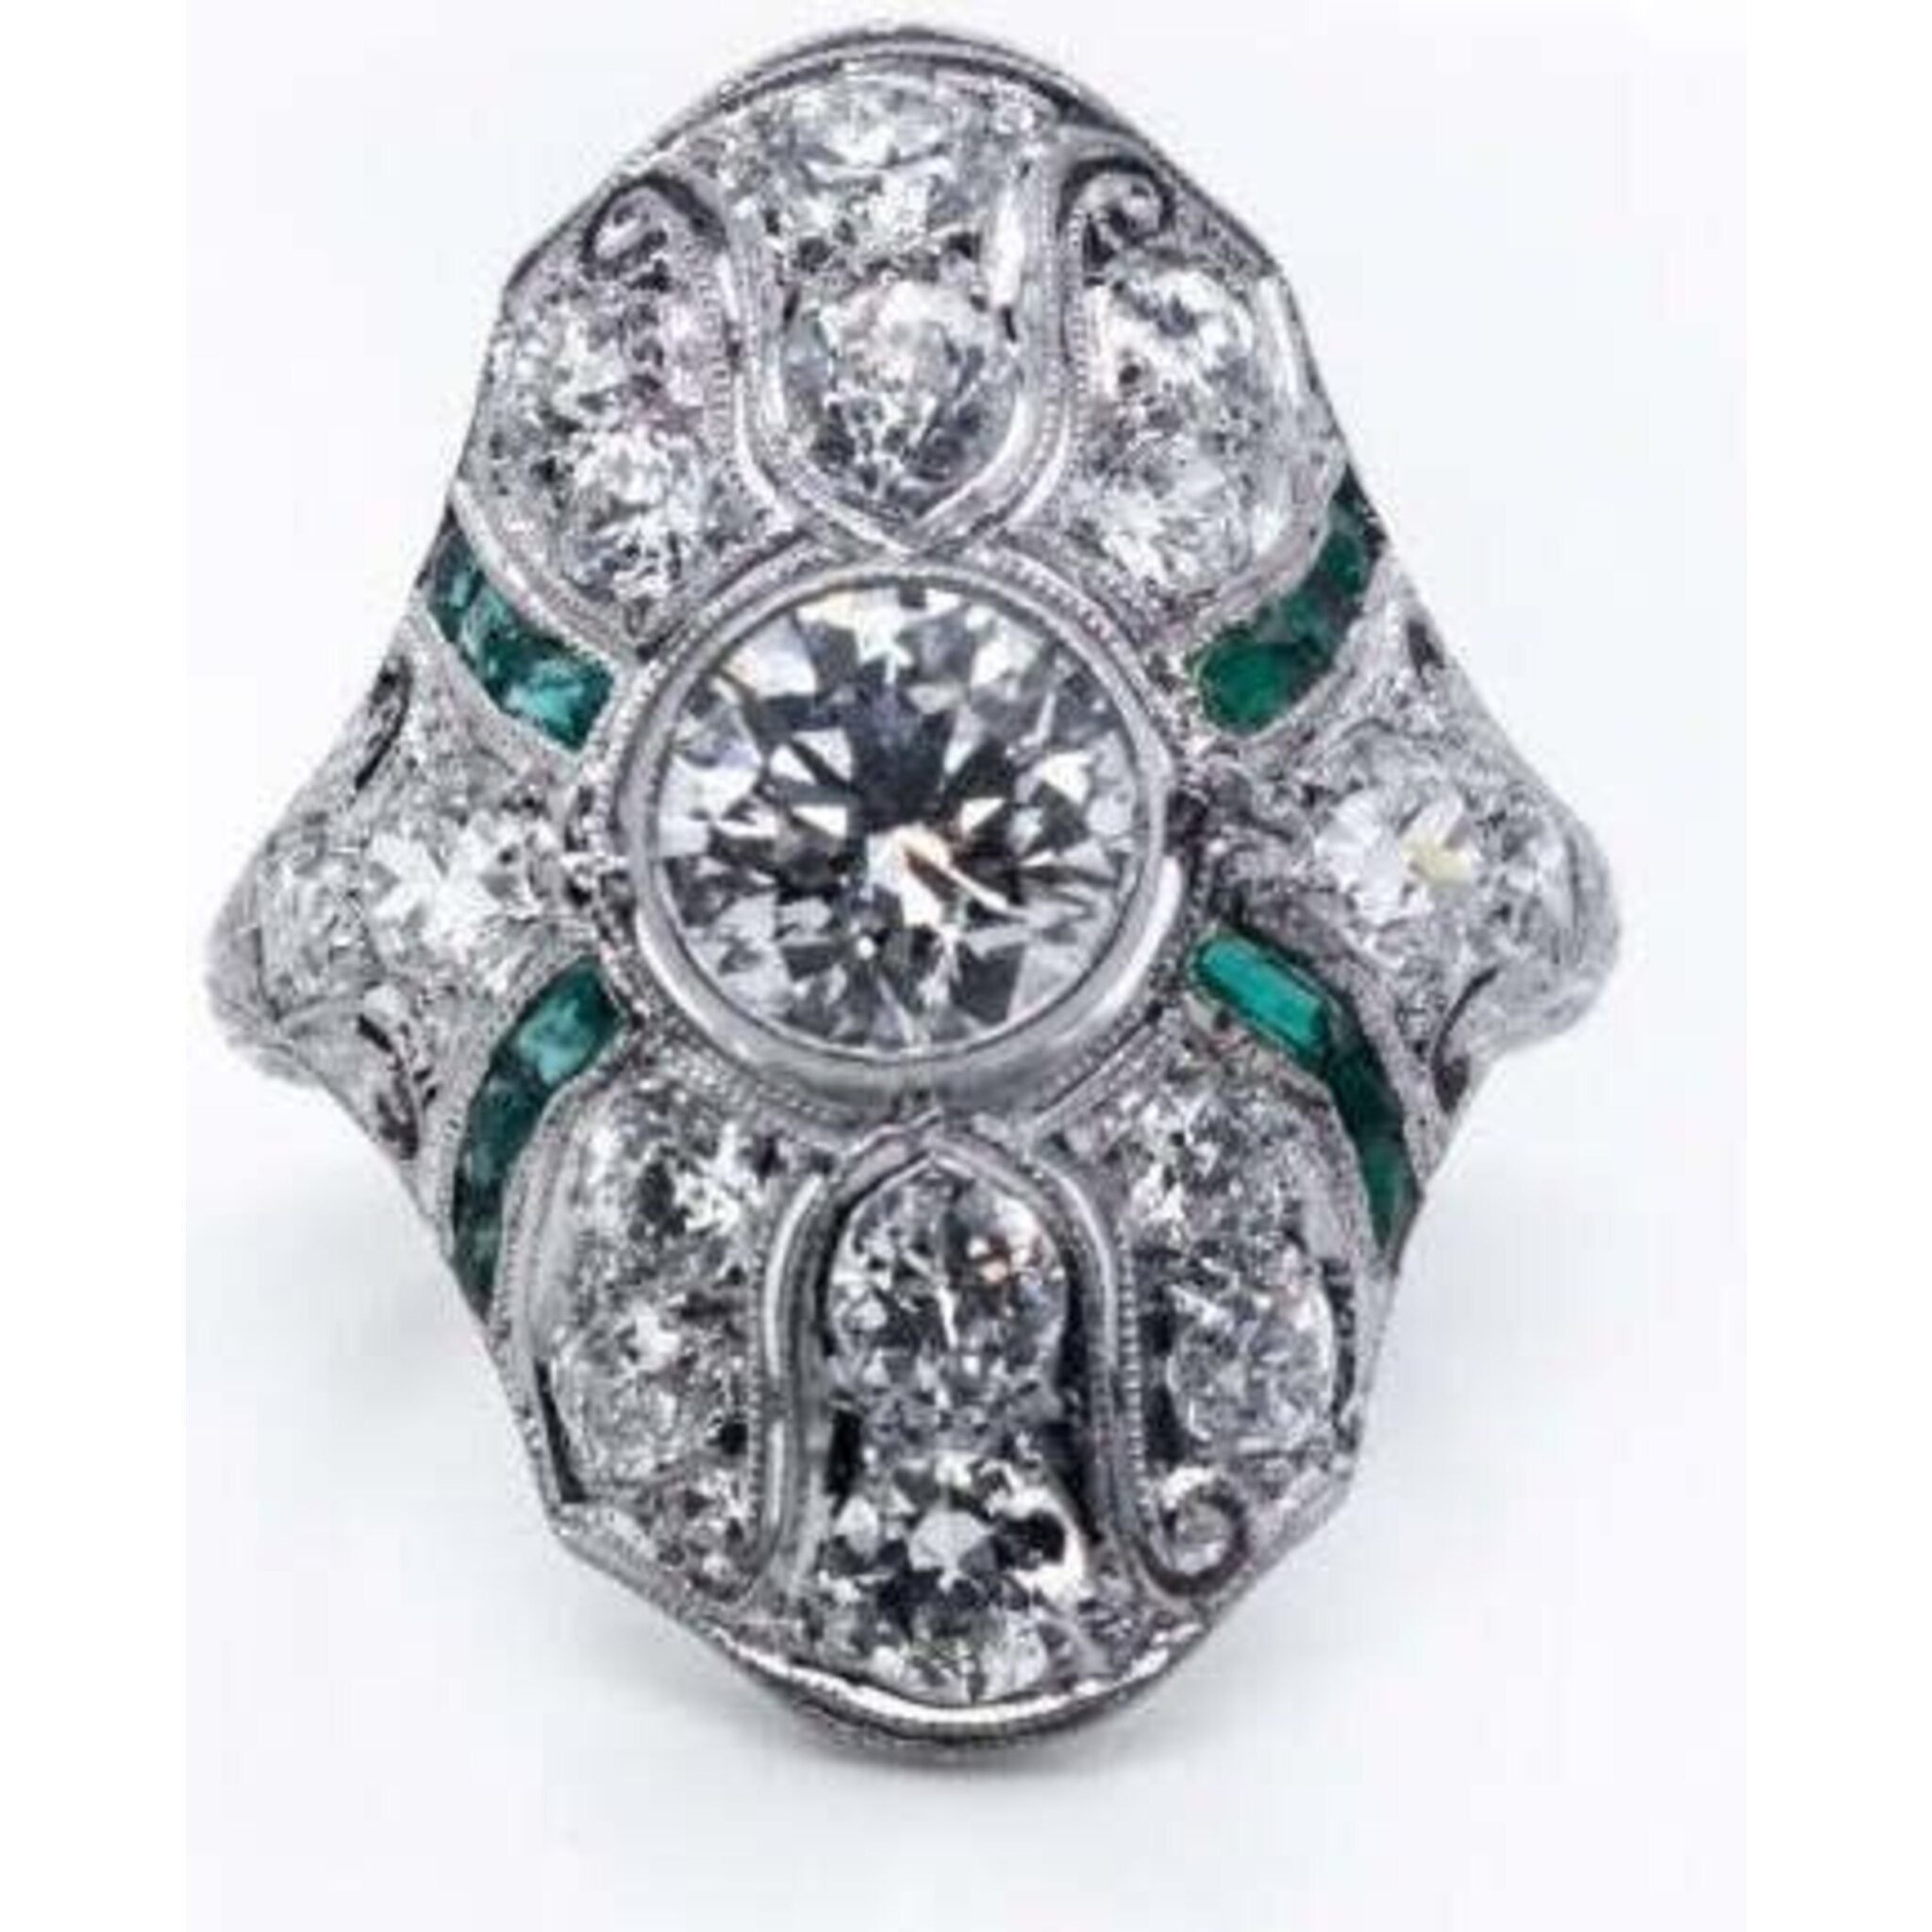 How to Choose An Art-Deco Engagement Ring | Blog | Diamonds HG